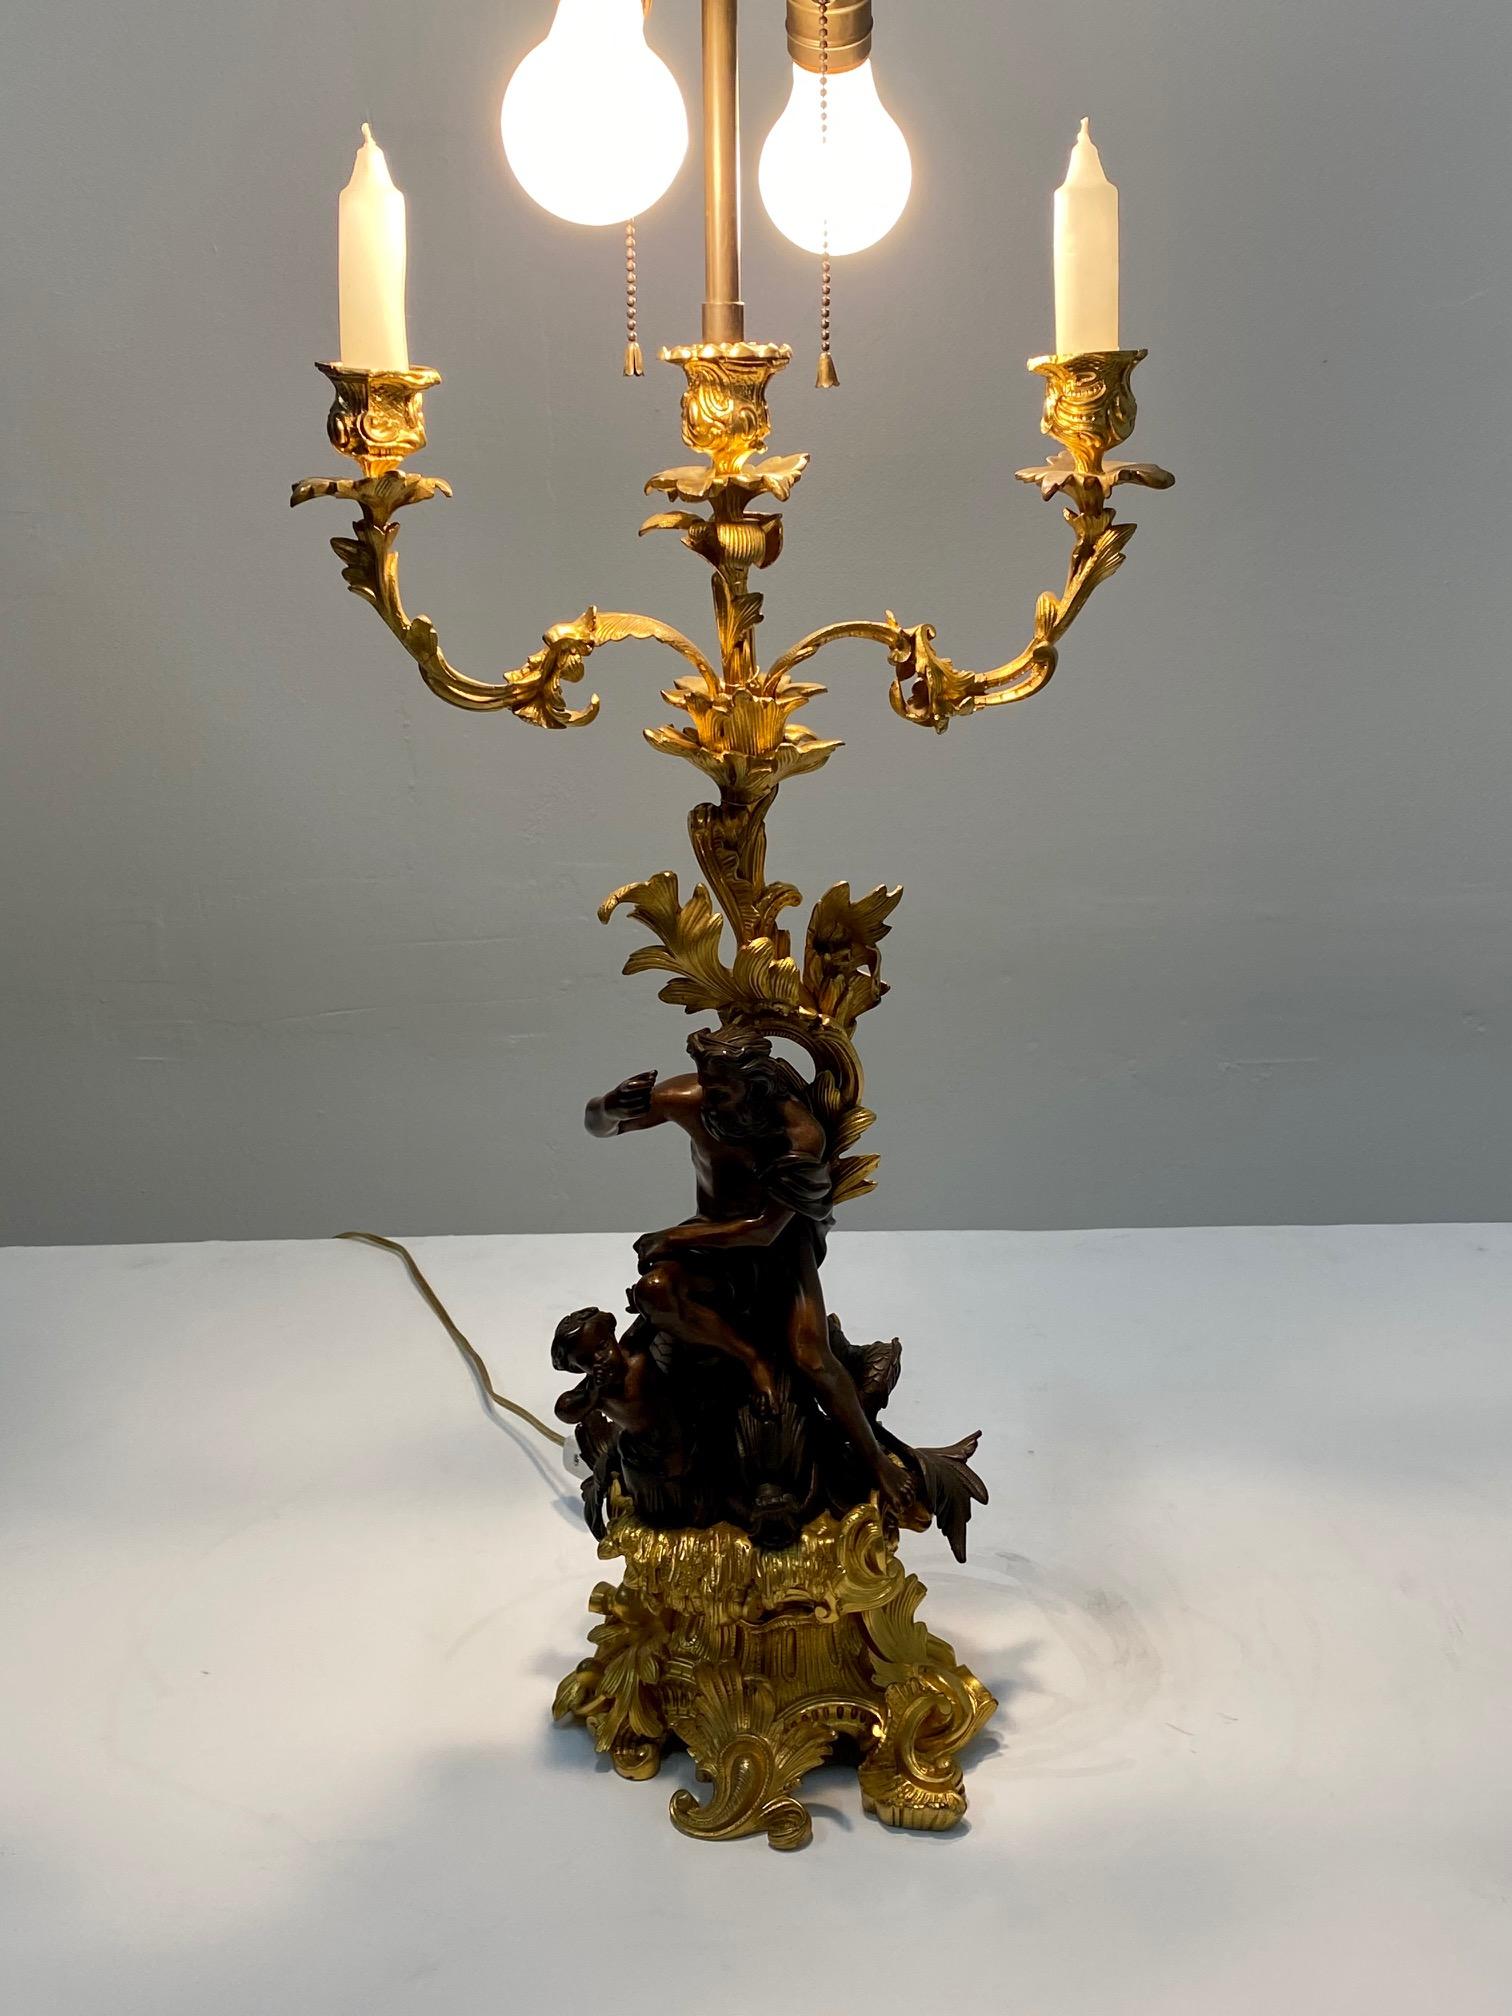 Ornate Antique French Gilt & Patinated Myth Inspired Bronze Candlestick Lamp 12